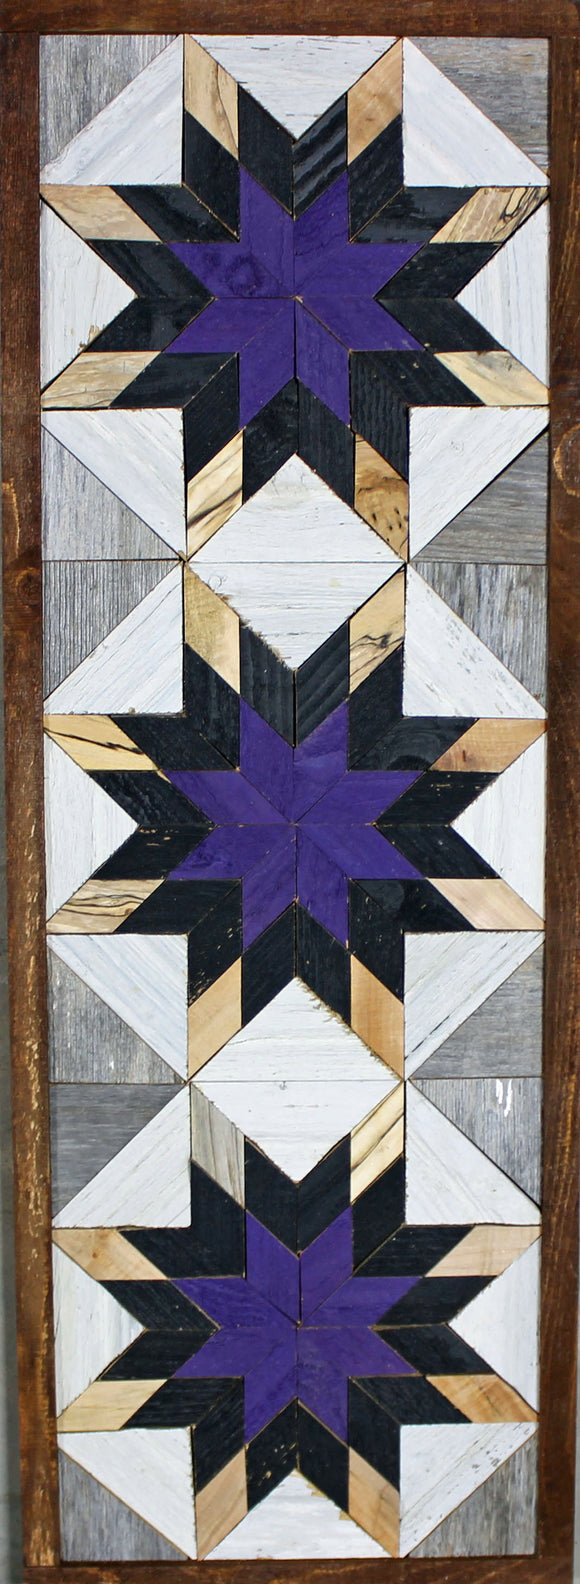 Amish Barn Quilt Wall Art, 30 by 10.5 Purple and black stars